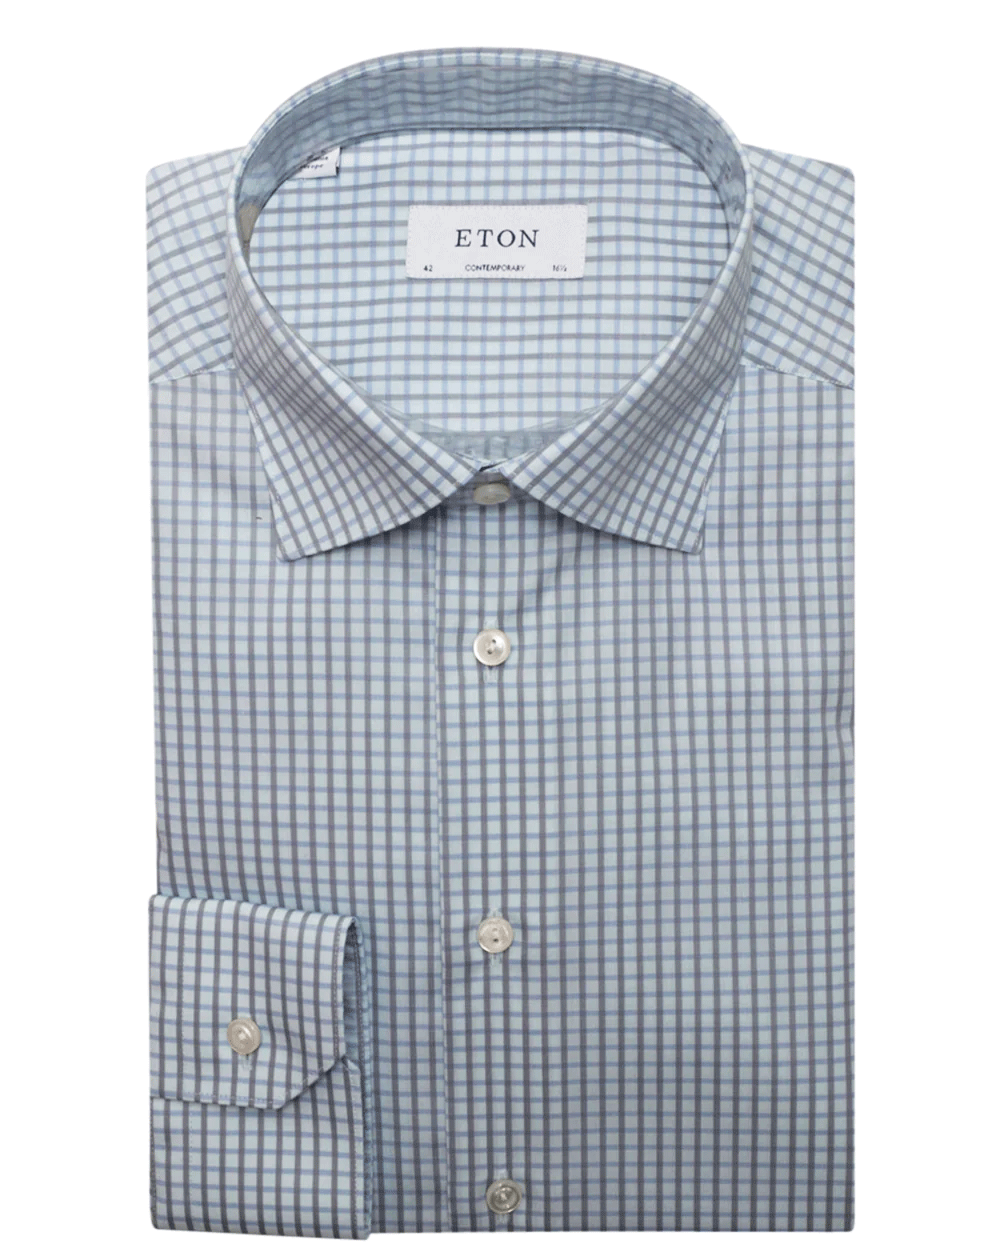 Mid Blue and Grey Checked Cotton Dress Shirt